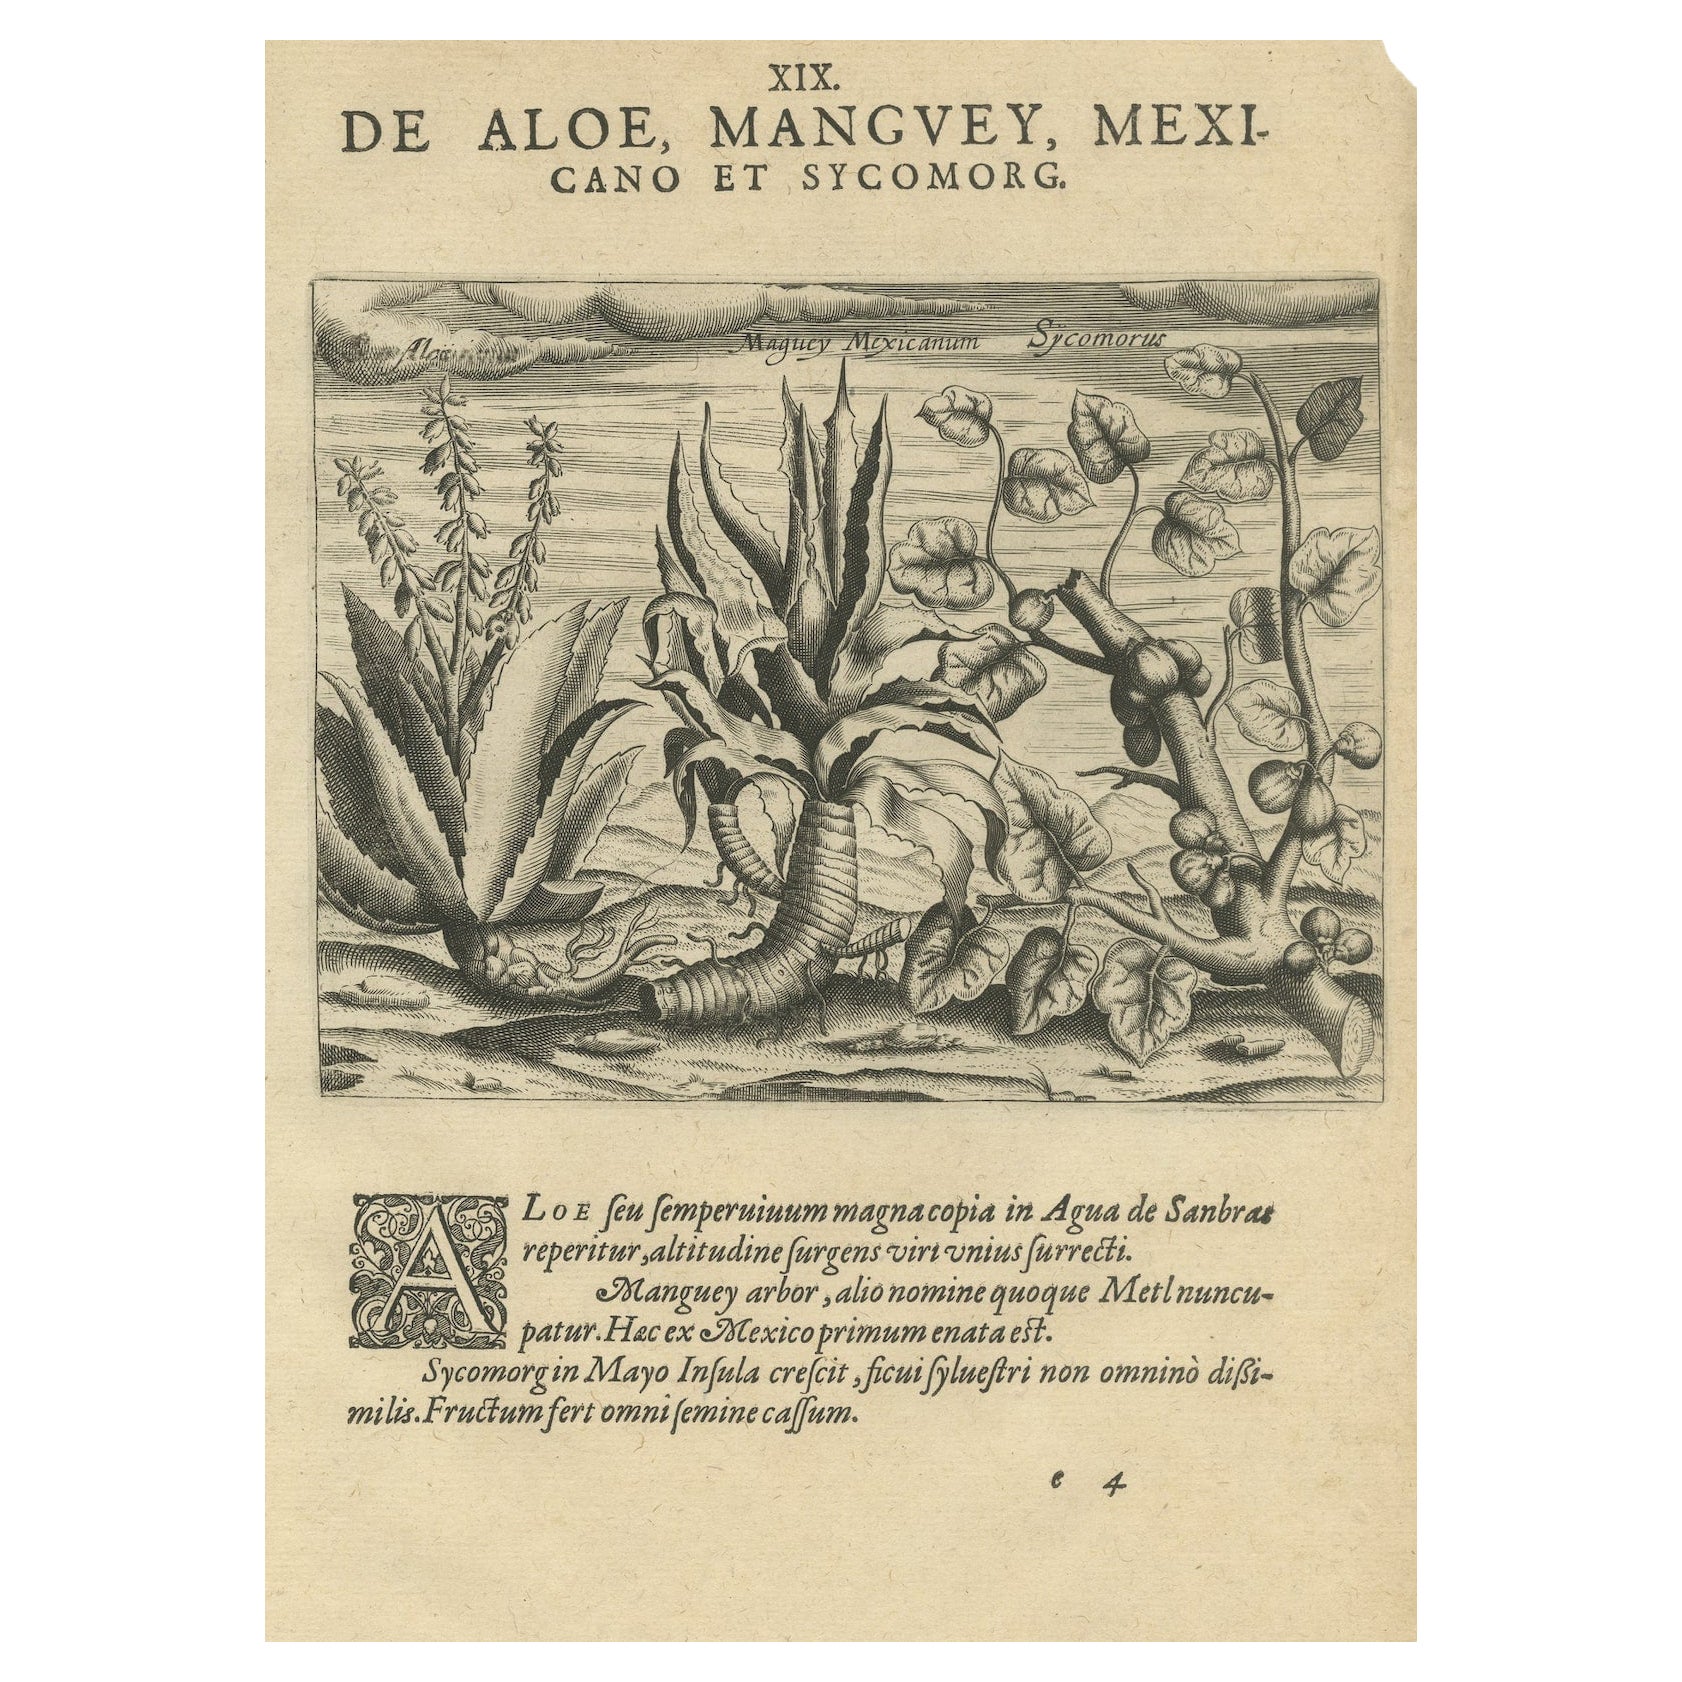 New World Flora: Aloe, Maguey, and Mexican Plants in De Bry's 1601 Work